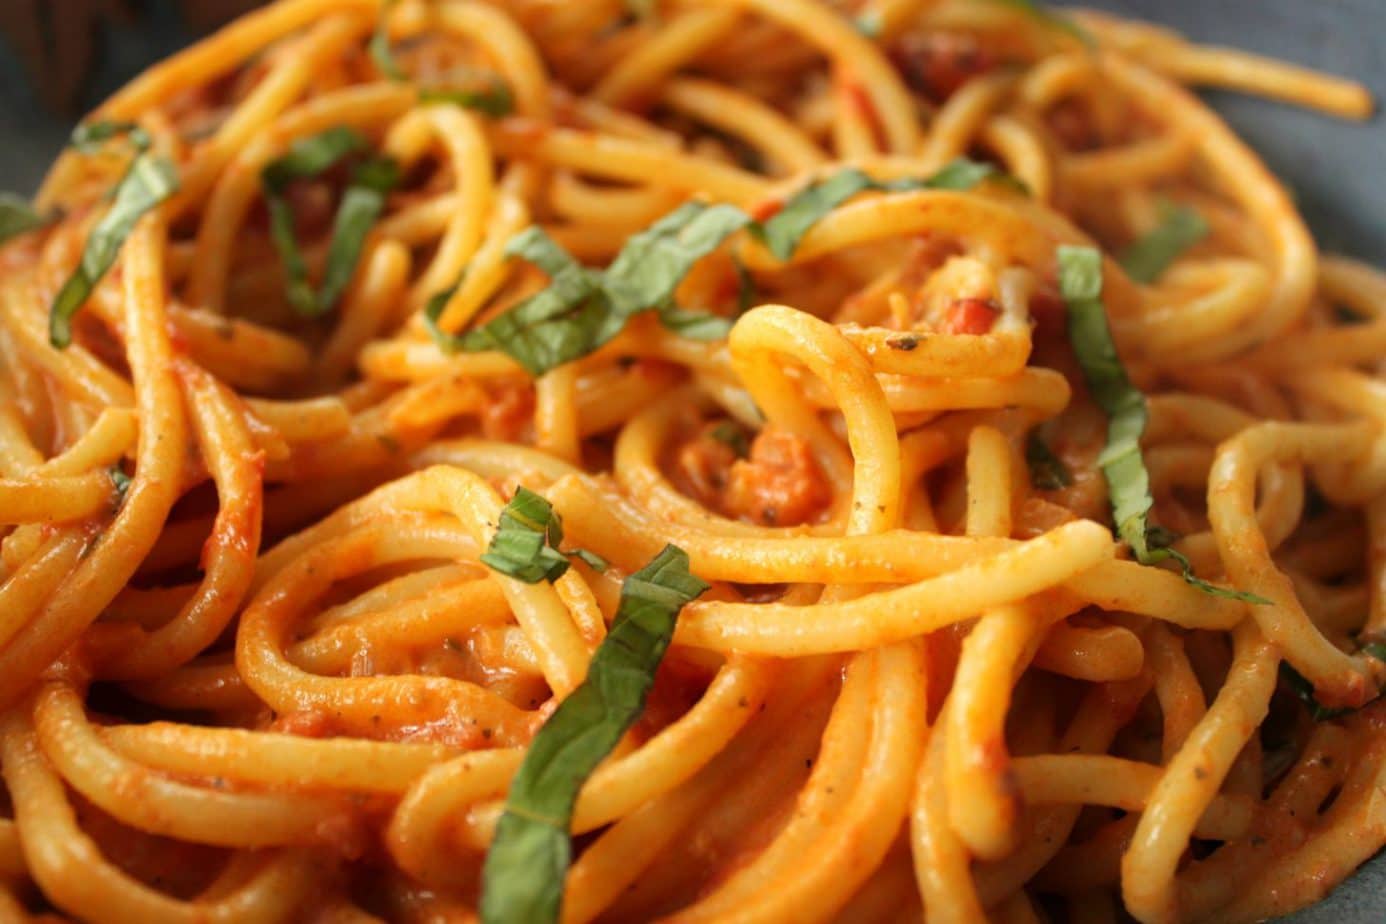 A plate of cooked bucatini pasta coated in a rose vodka sauce and garnished with fresh basil.